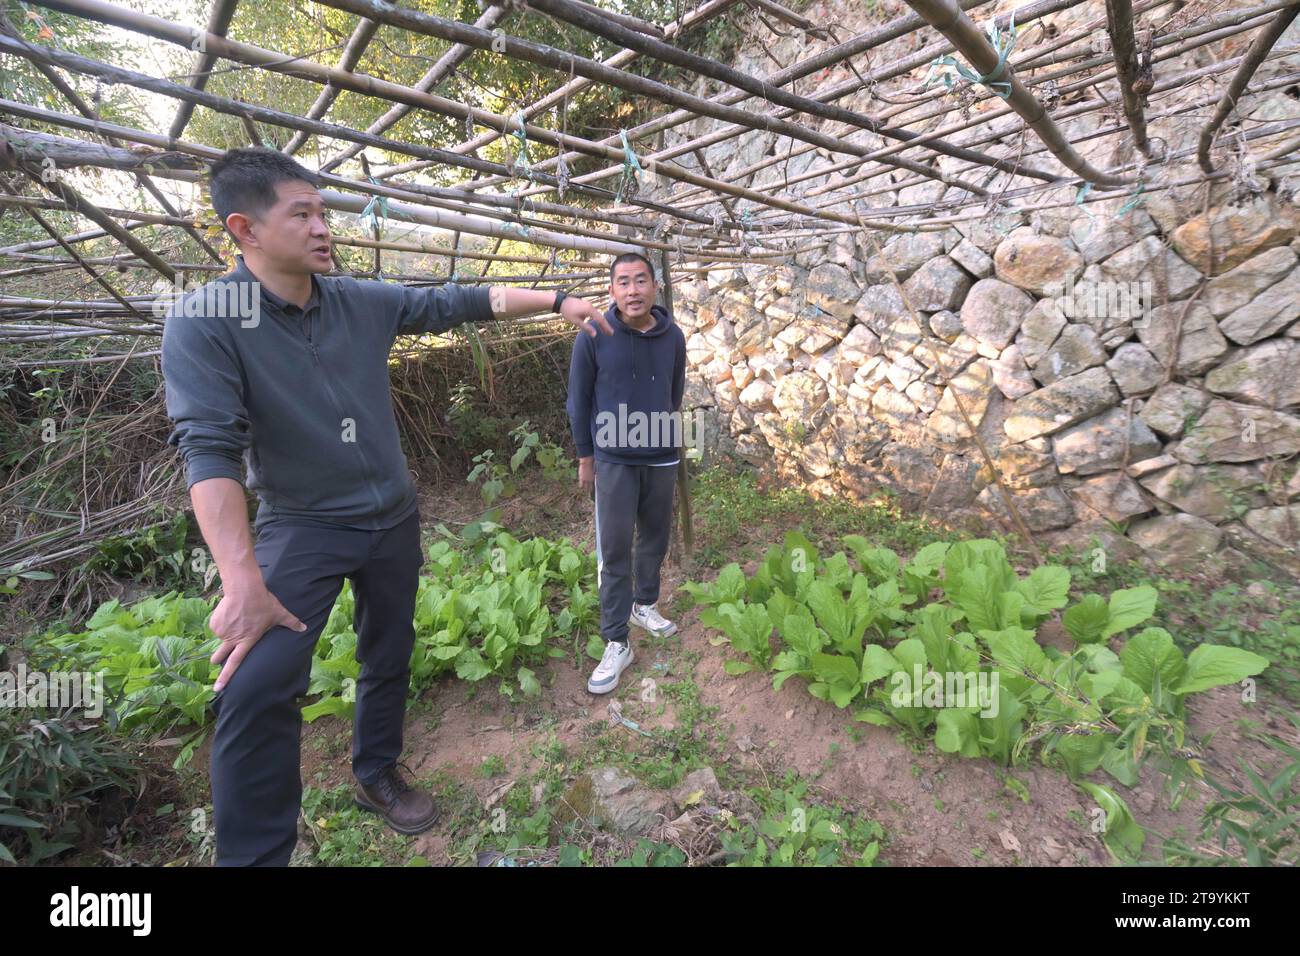 (231128) -- FUZHOU, Nov. 28, 2023 (Xinhua) -- Lin Yinan (L) and a villager check the relic site of a villa once built by foreigners in Fuzhou, southeast China's Fujian Province, Nov. 23, 2023. Kuliang, or Guling in Mandarin, is situated on the outskirts of Fuzhou, southeast China's Fujian Province. A century ago, foreigners residing in Fuzhou built villas in Kuliang, fostering a harmonious coexistence with local villagers and thus contributing to the enduring 'Kuliang stories.' 'The essence of the Kuliang stories lies in the connections between individuals. Although these foreigners had dif Stock Photo